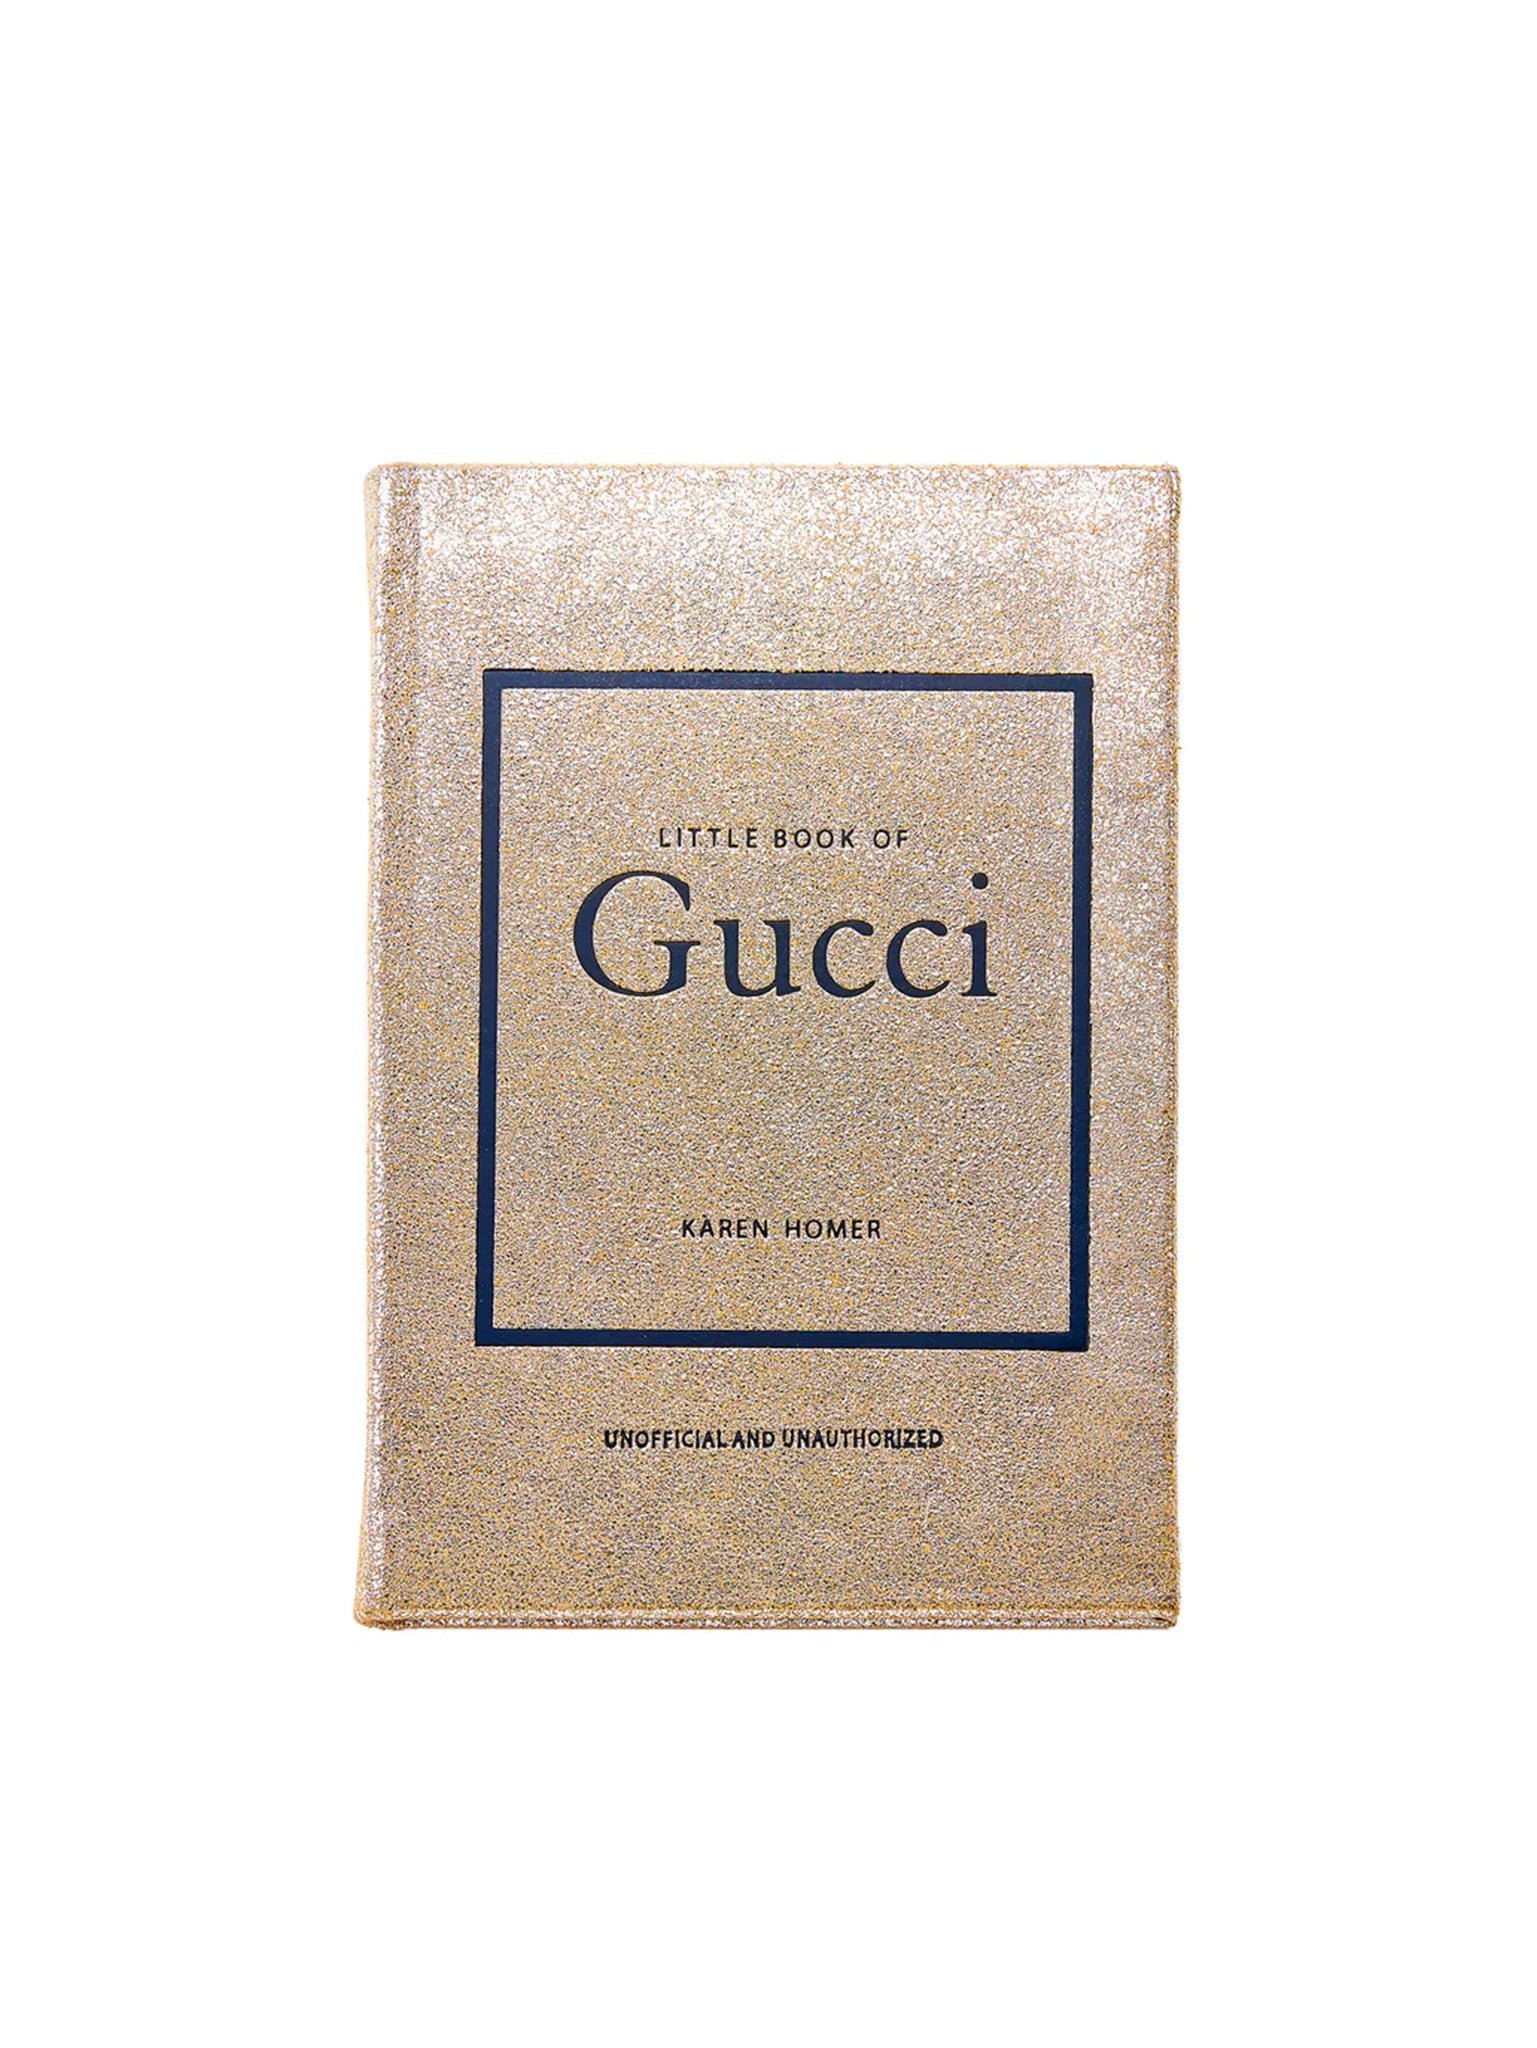 Little Book Of Gucci Leather Bound Edition Weston Table